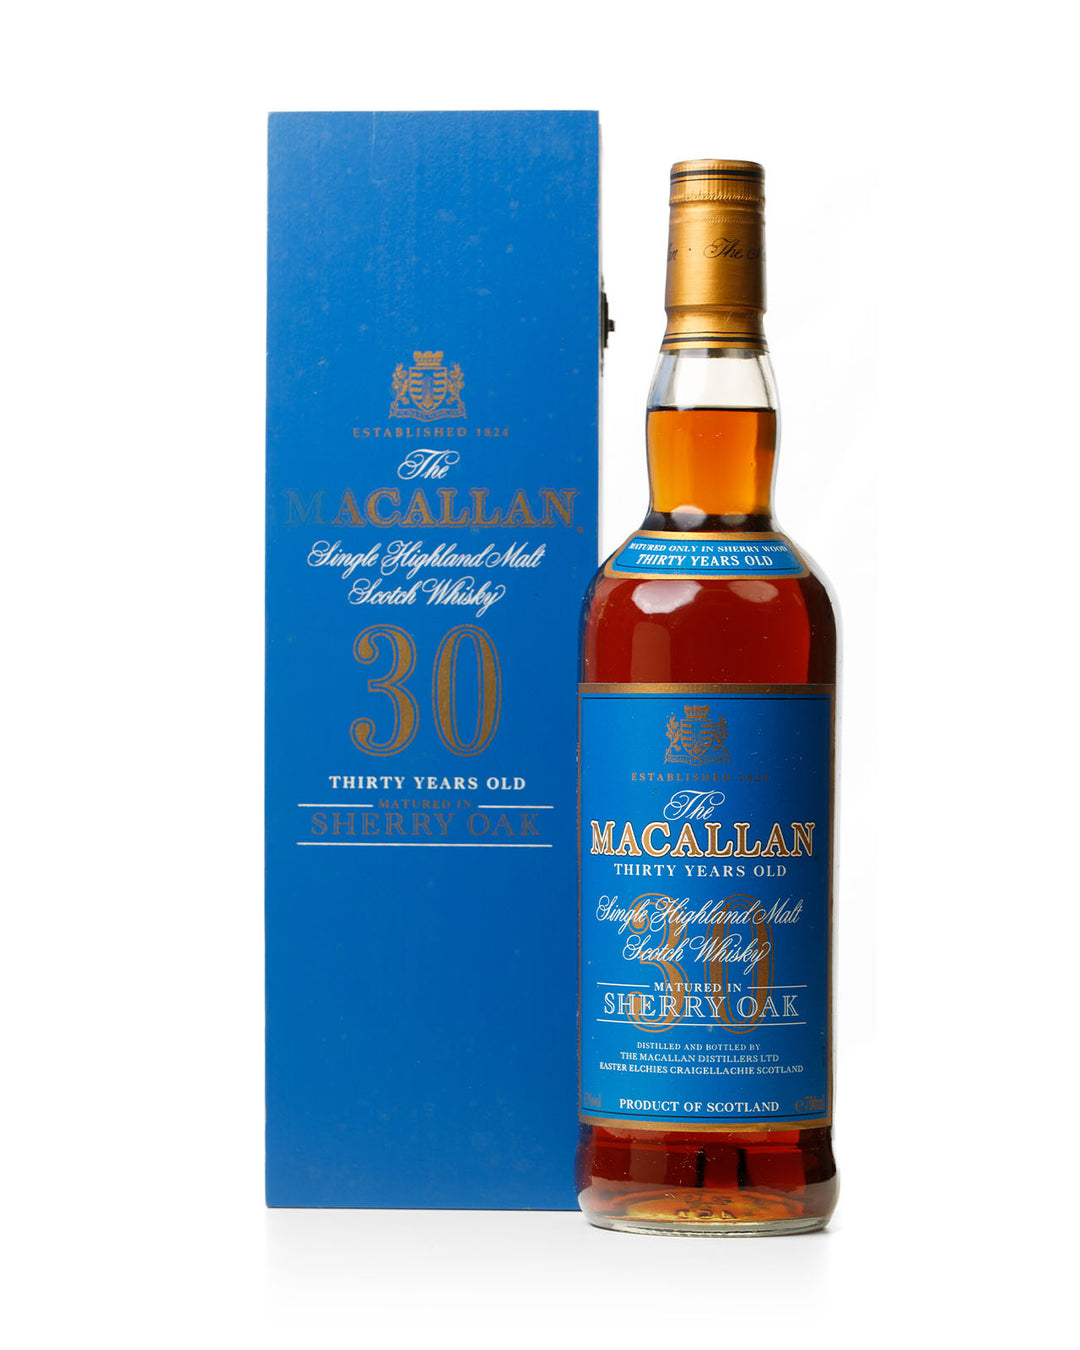 Macallan 30 Year Old Sherry Oak Bottled 1990s-2000s With Original Box